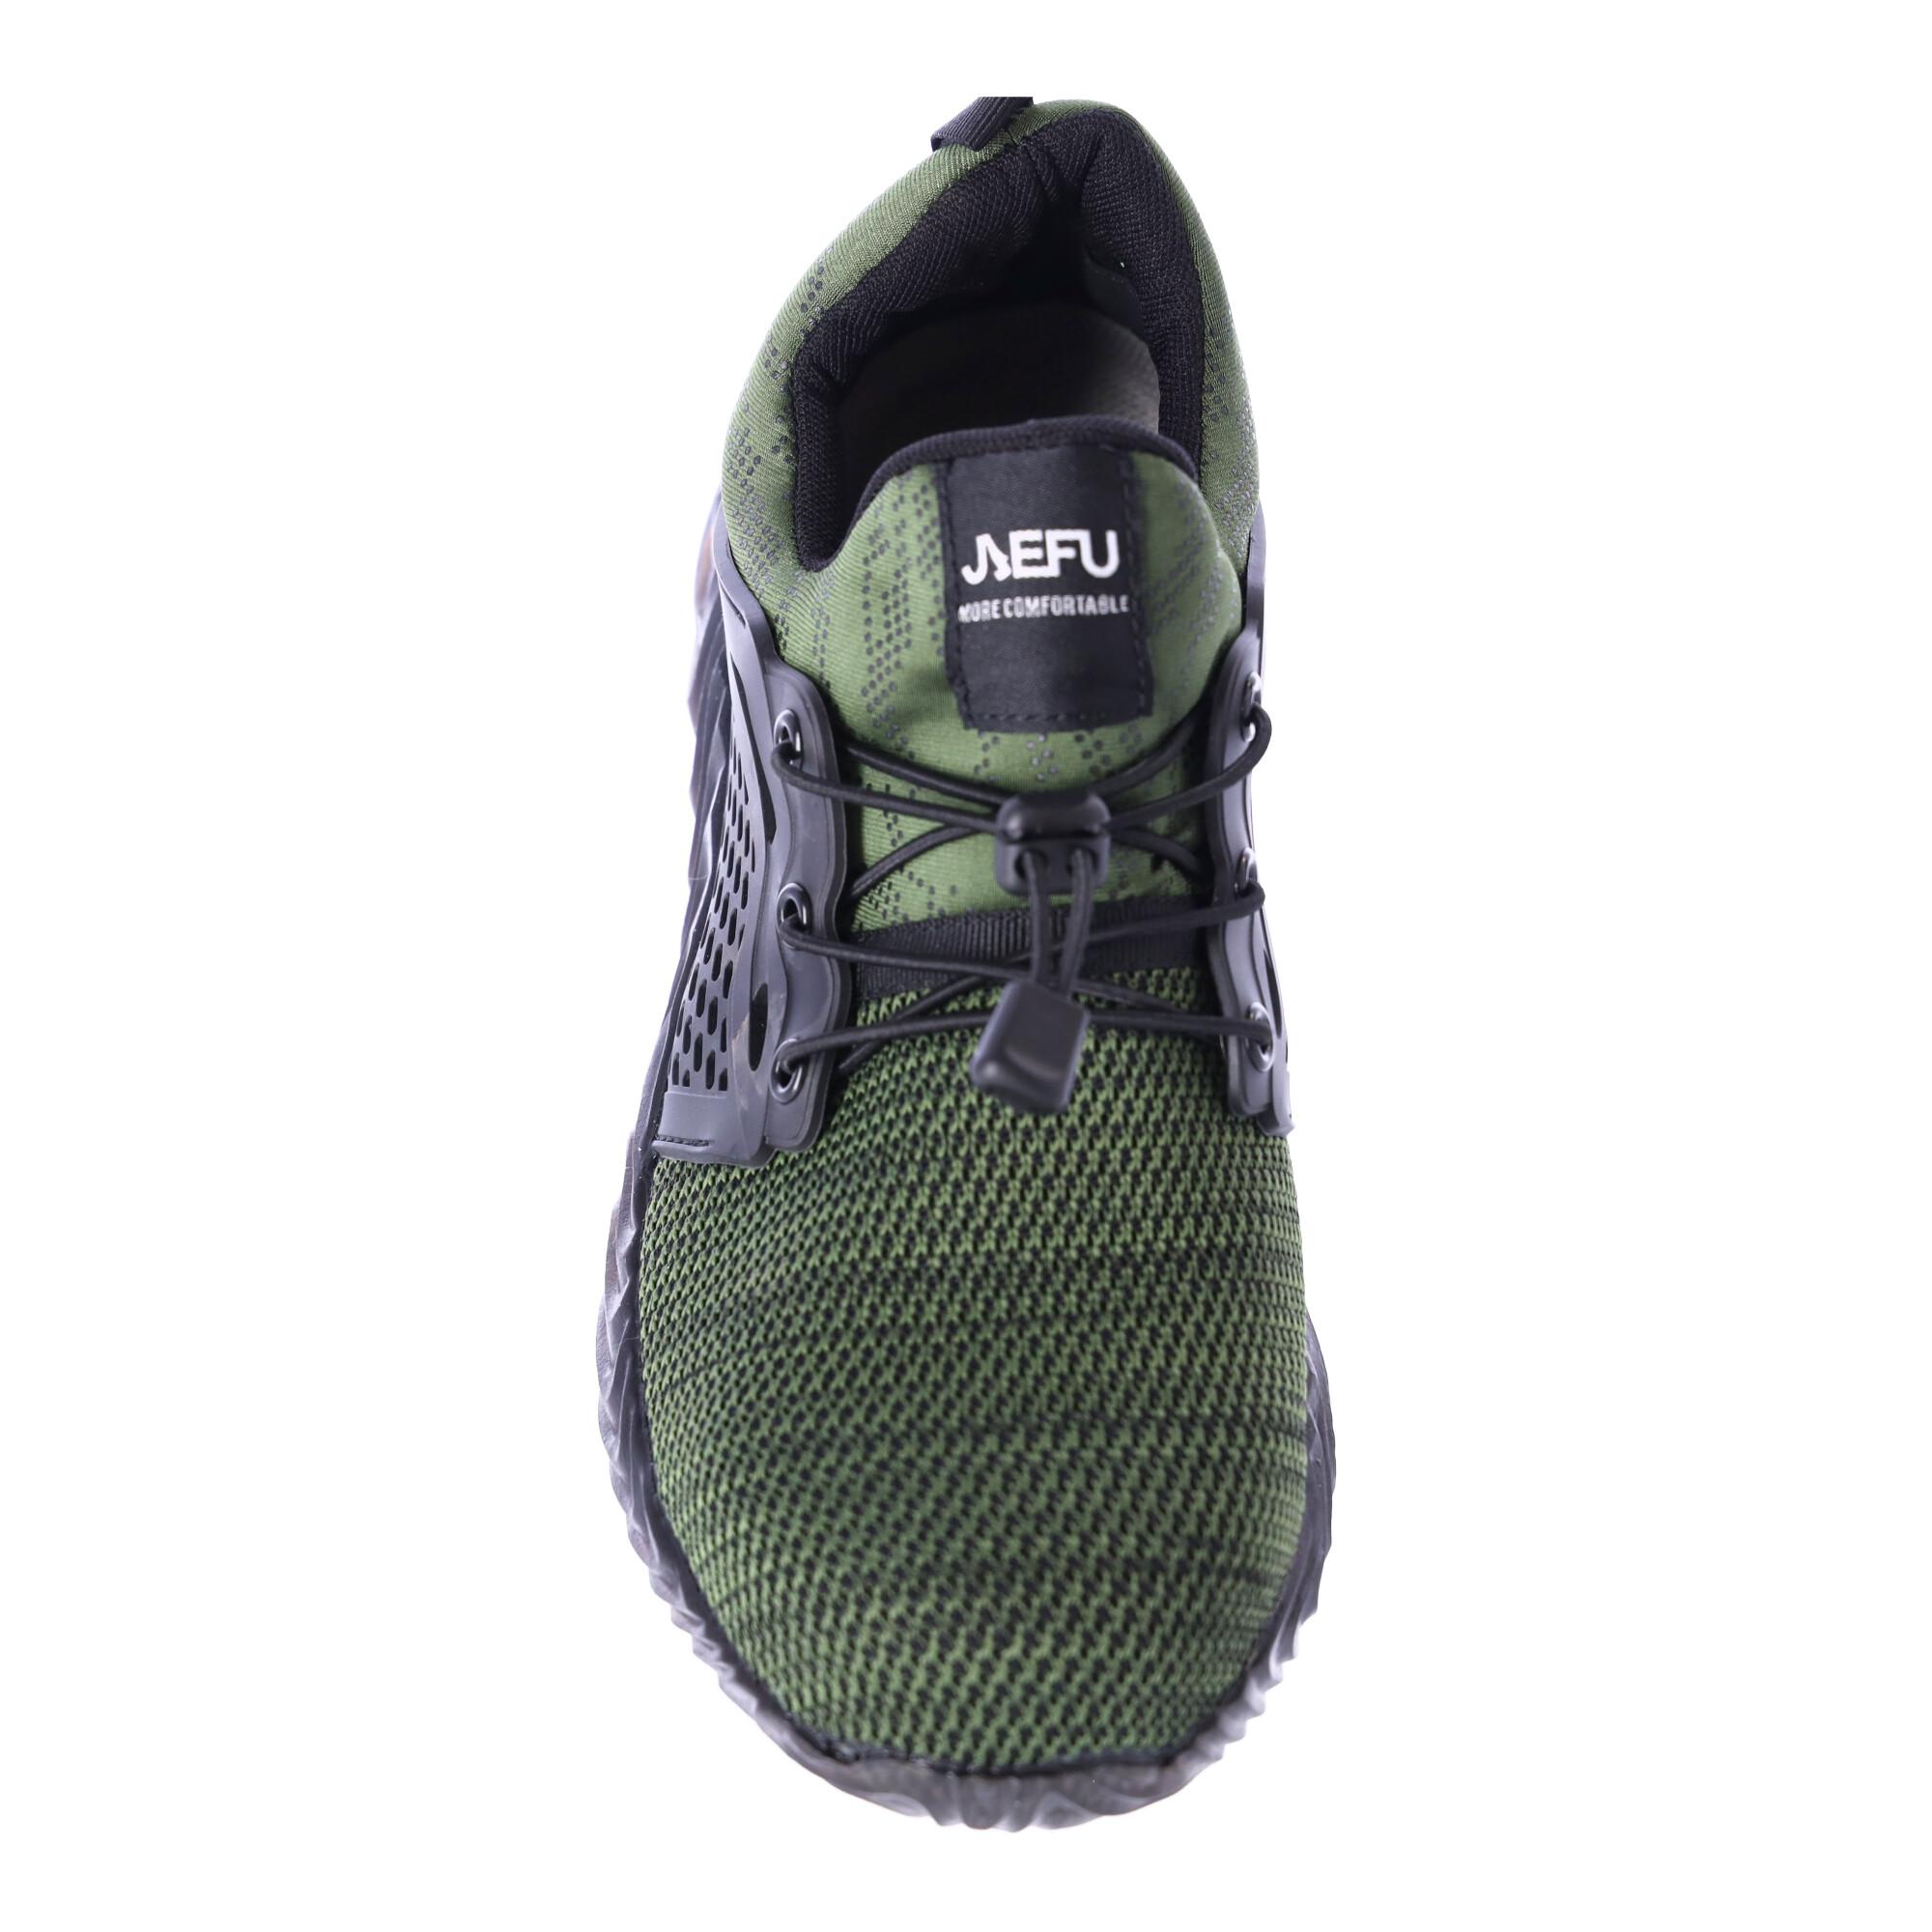 Work safety shoes "44" - green